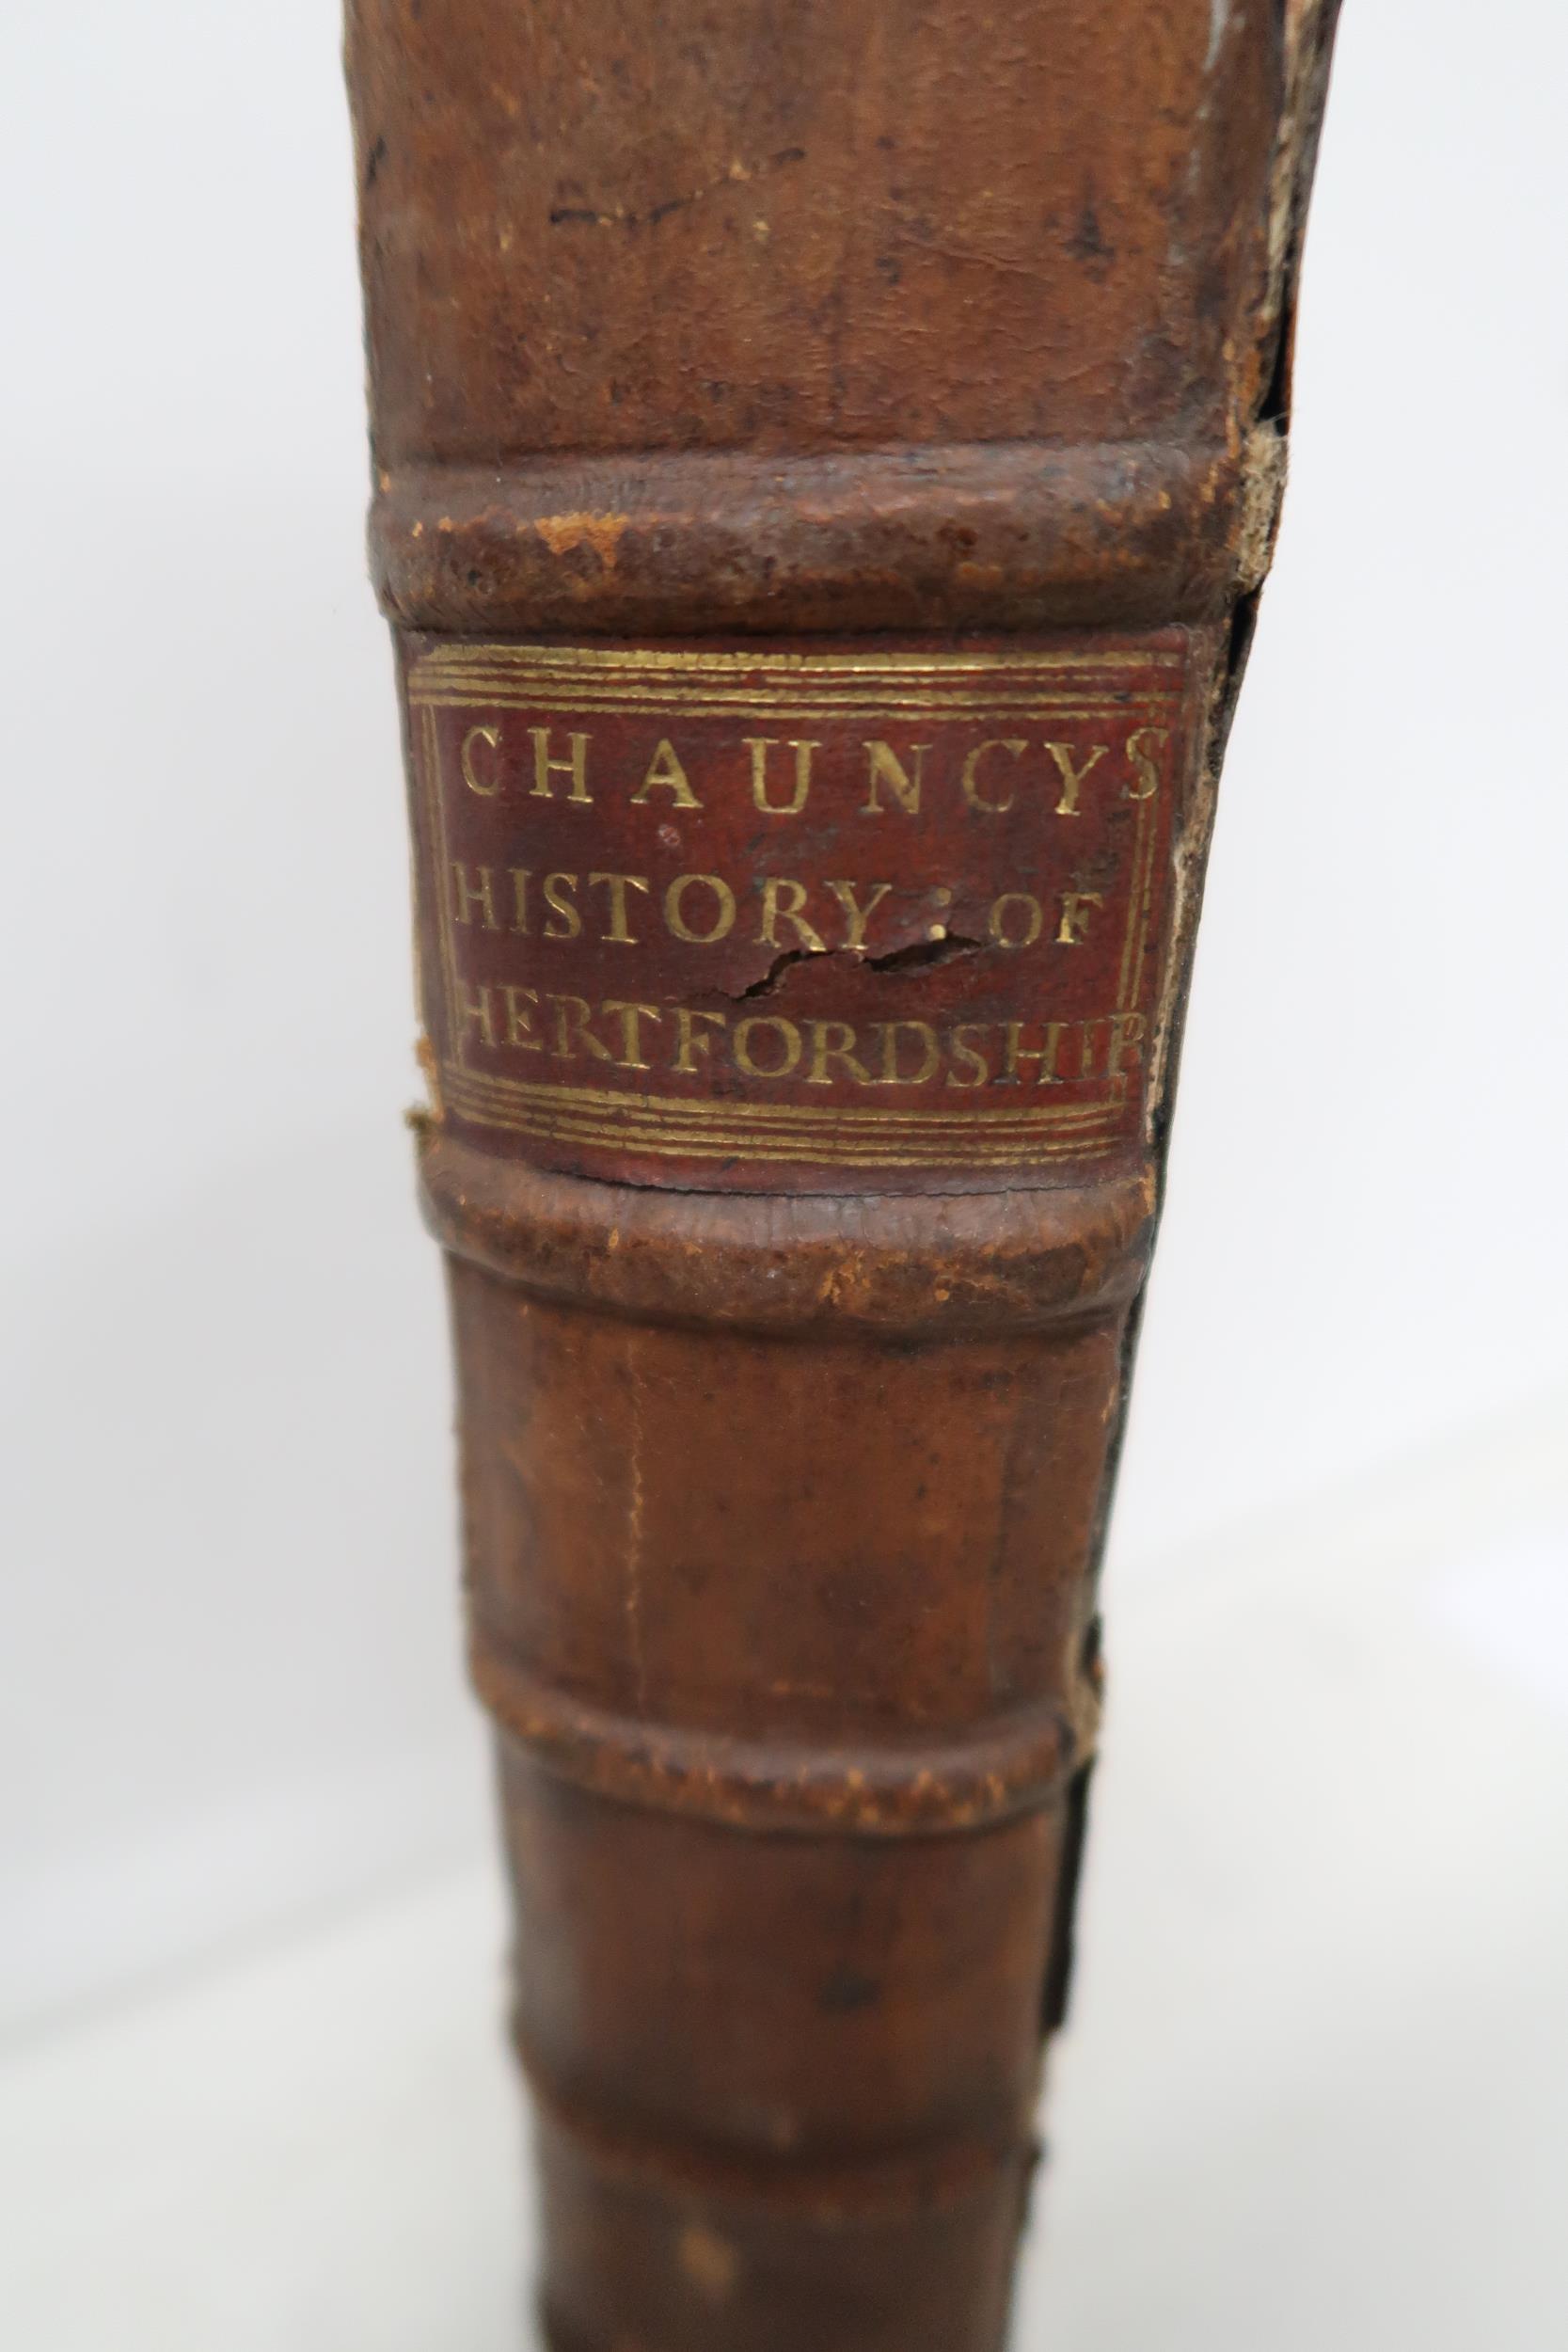 A leather bound book - Chauncy History of Hertfordshire